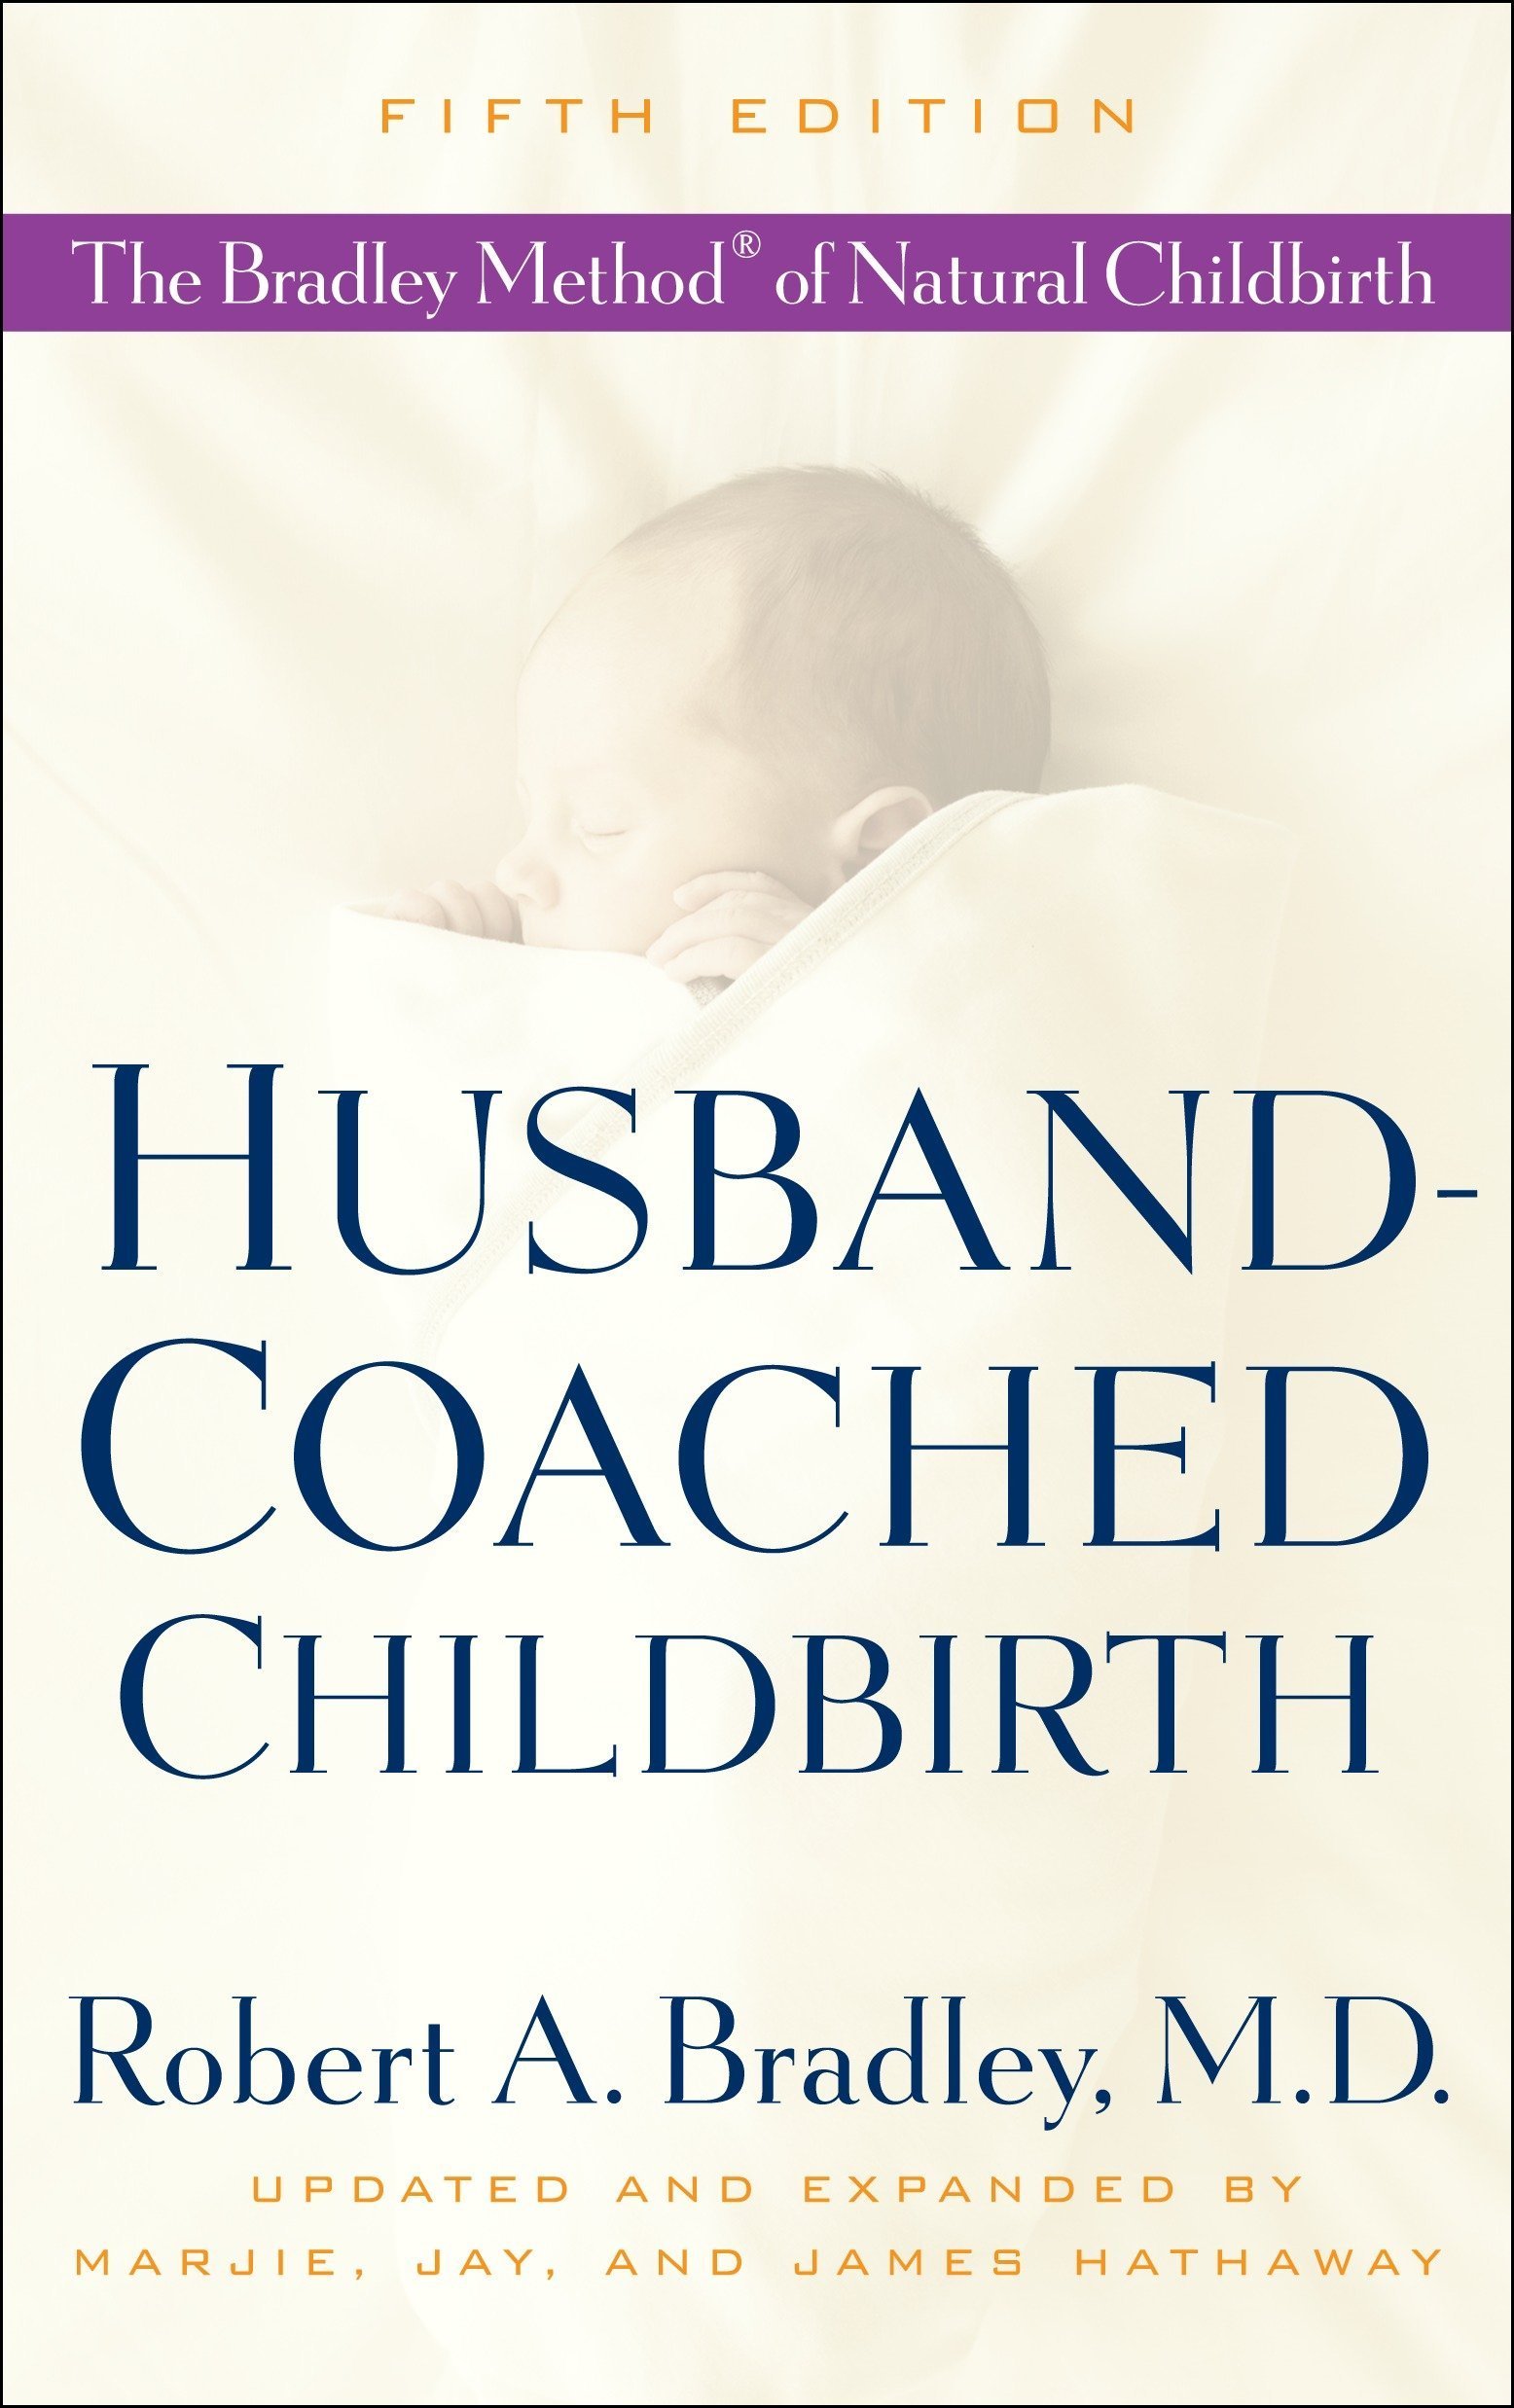 "Husband-Coached Childbirth" by Robert A Bradley, M.D., Marjie Hathaway, Jay Hathaway, and James Hathaway